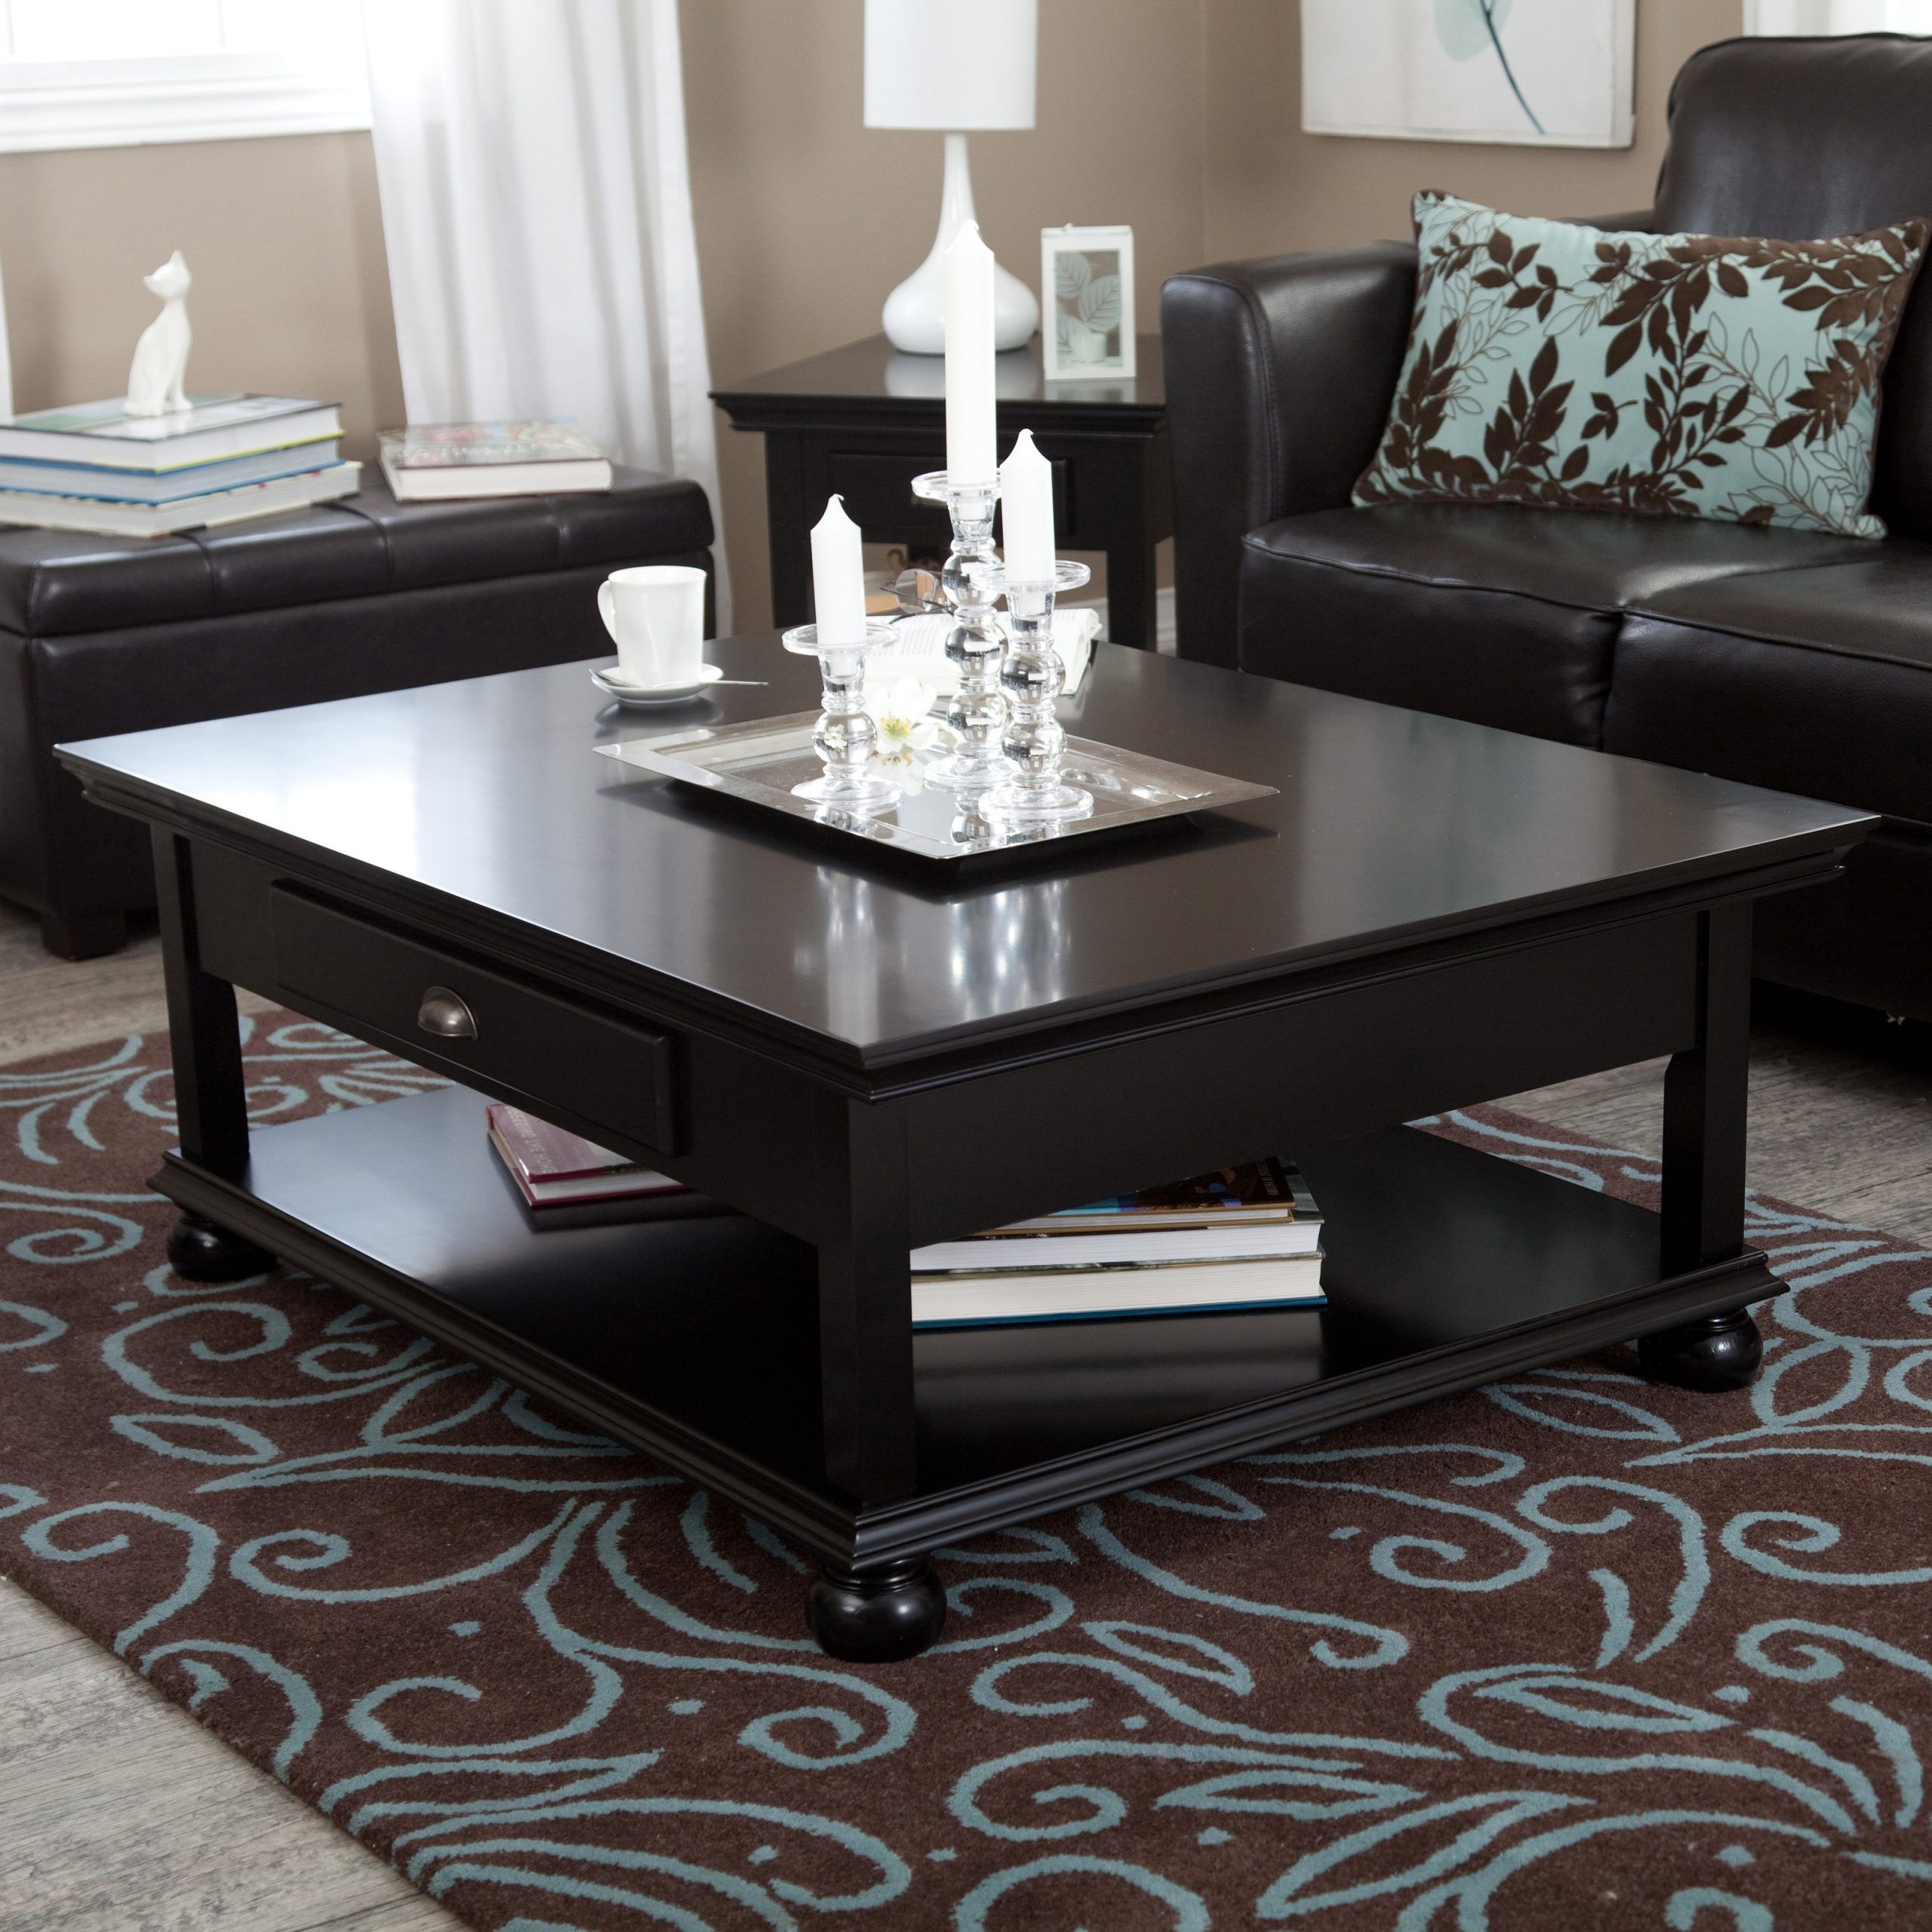 Dark Coffee Bean Cocktail Tables With Regard To Trendy Parker Coffee Table – Black At Hayneedle (View 3 of 20)